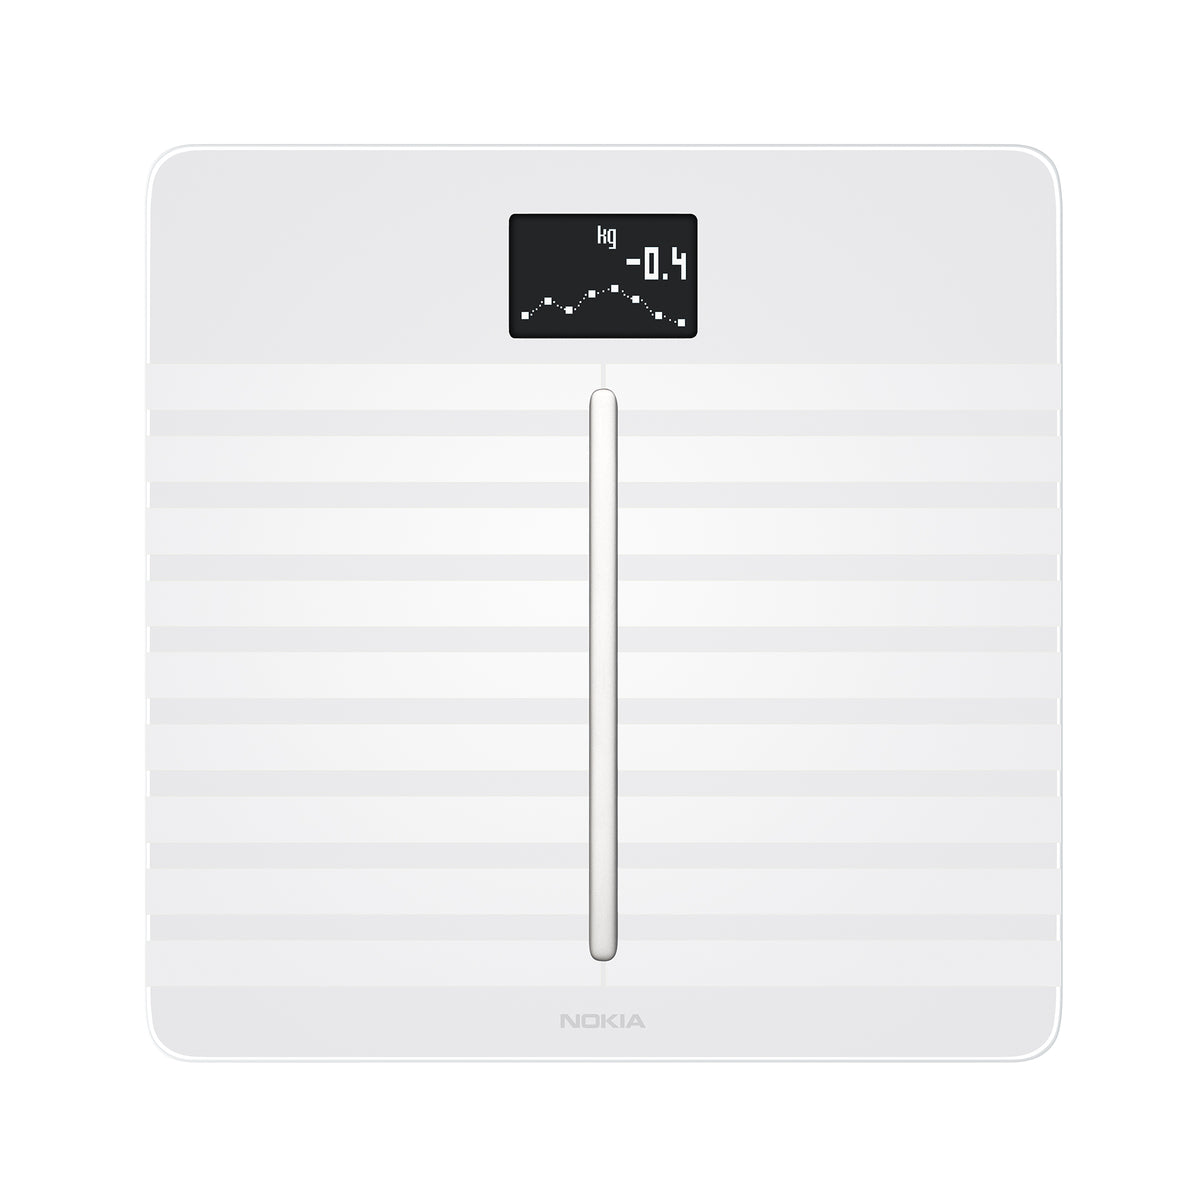 Withings Body Cardio Wi-Fi Smart Scale - White (70154203) for sale online